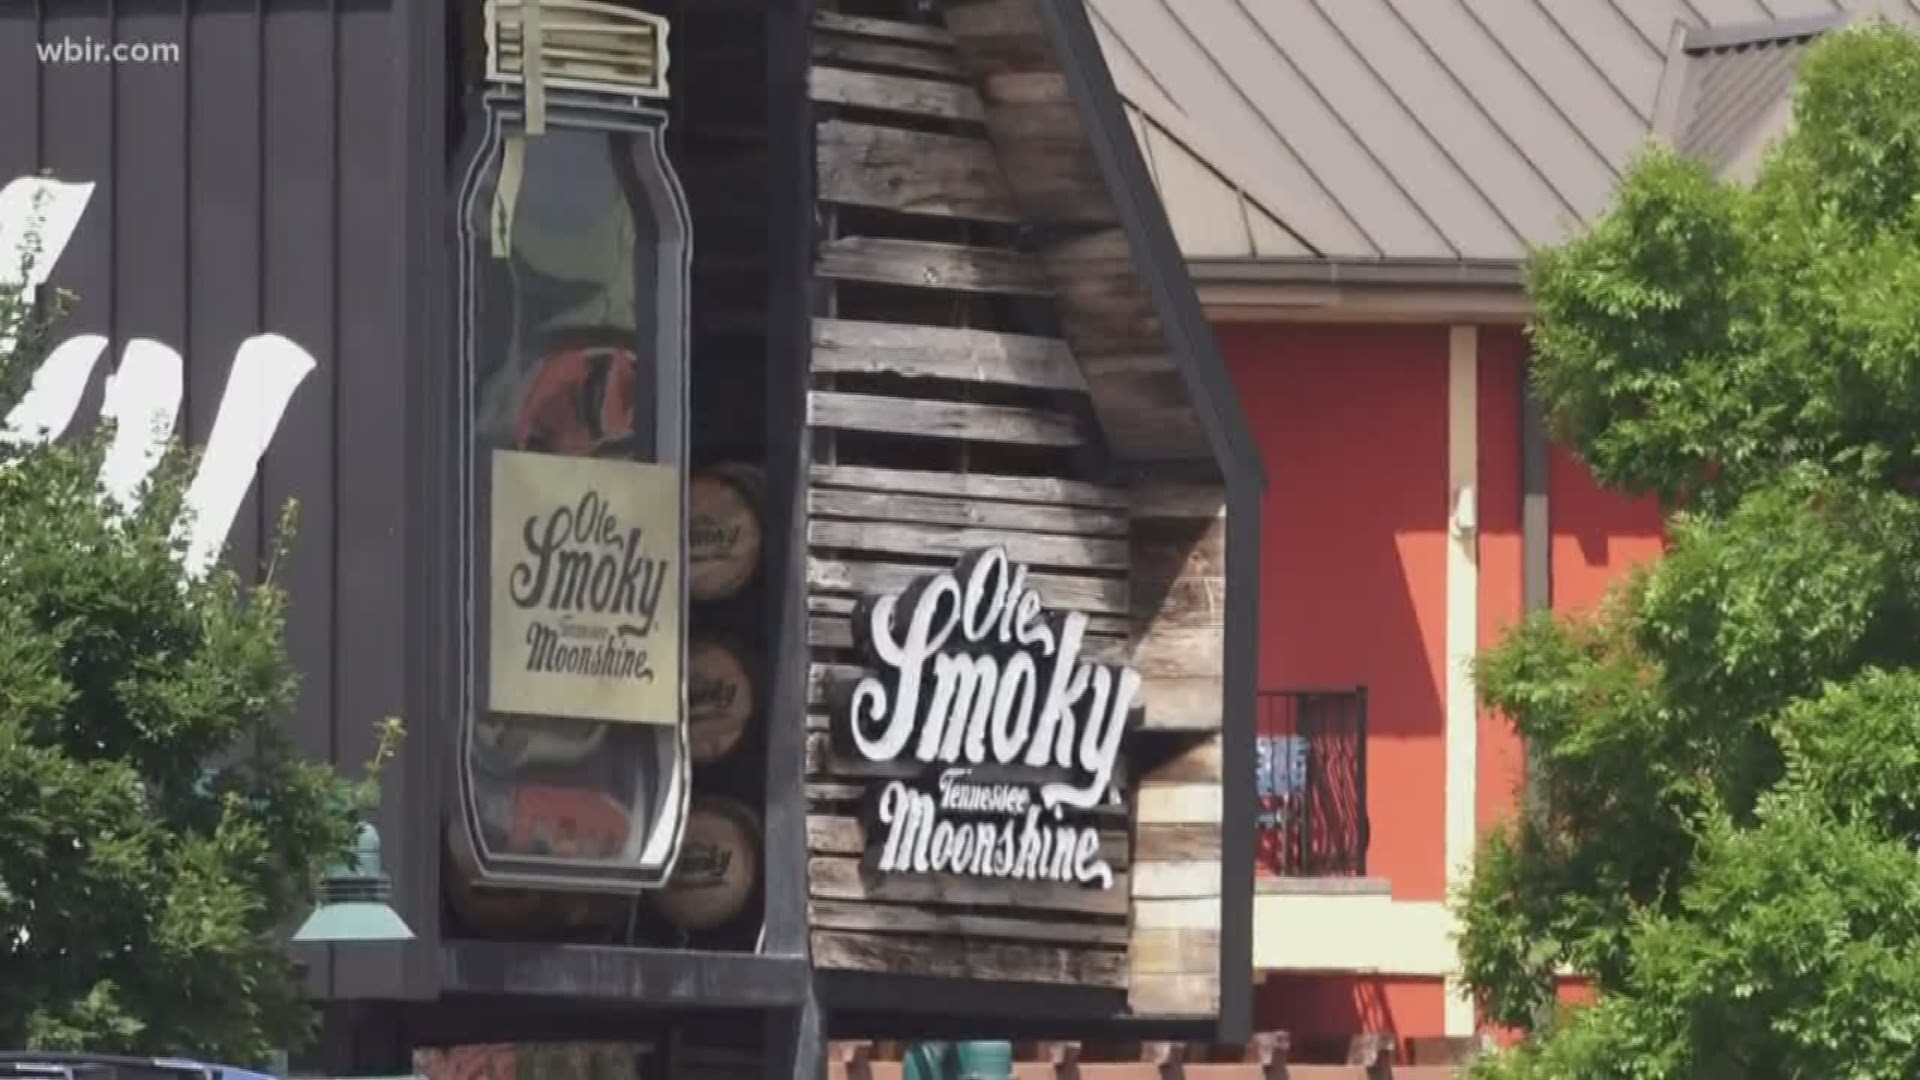 More than 6.6 million people visit the state's distilleries each year.